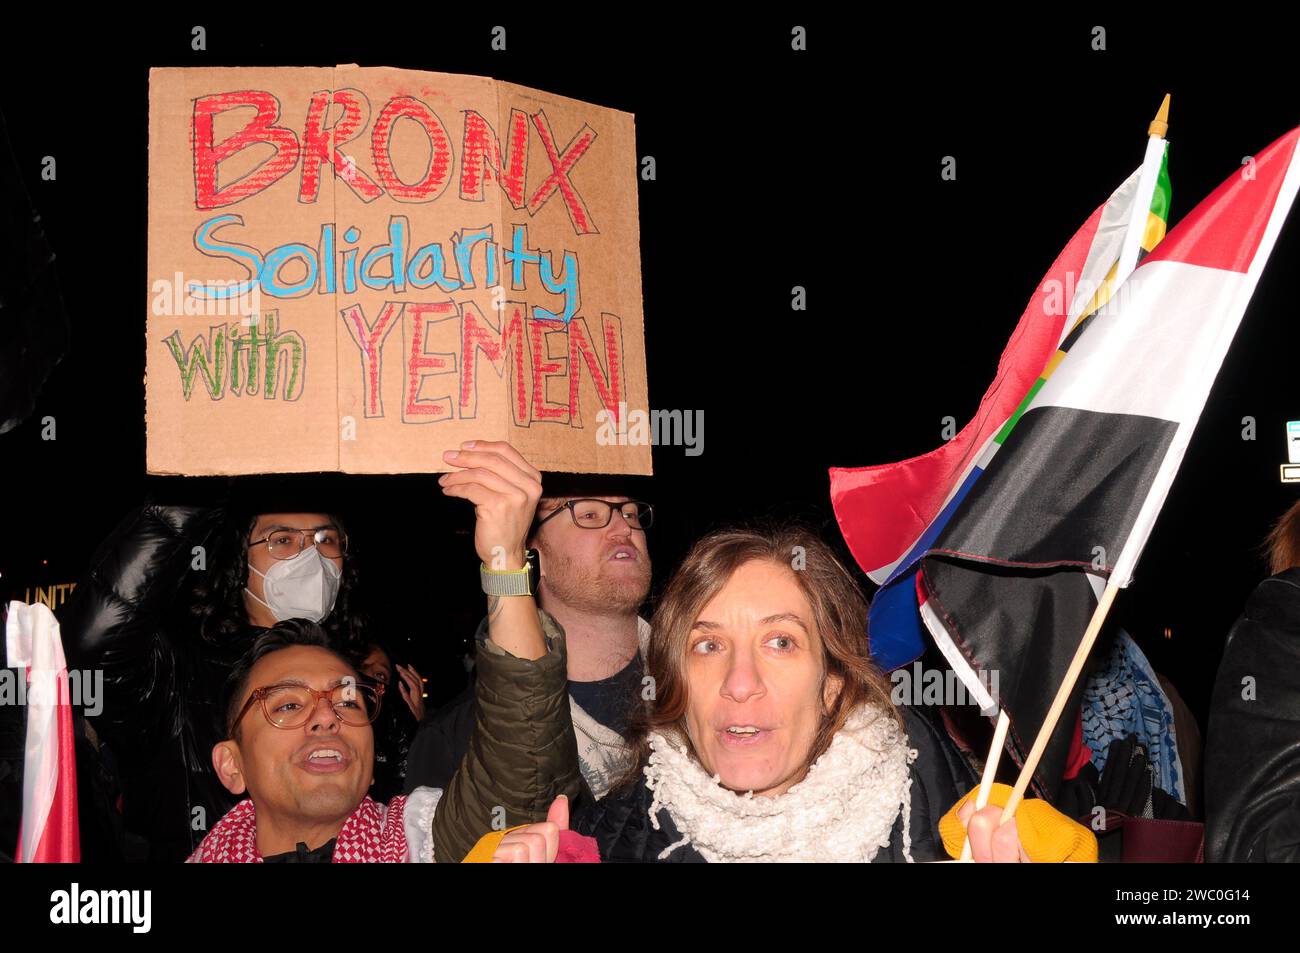 A protester displays a placard that says, 'Bronx Solidarity with Yemen,' while another protestor, right, holds the South African flag and the Yemeni flag at a rally supporting Yemen and Palestine. Hundreds of demonstrators marched in Manhattan, New York City to condemn the U.S. and U.K. militaries who launched airstrikes on Thursday, January 11 against Houthi targets in Yemen. Demonstrators also demanded a permanent ceasefire in the war between Israel and Hamas, and an end to the Israeli military's bombardment of Gaza. According to U.S. President Joe Biden, the January 11 airstrikes in Yemen ' Stock Photo